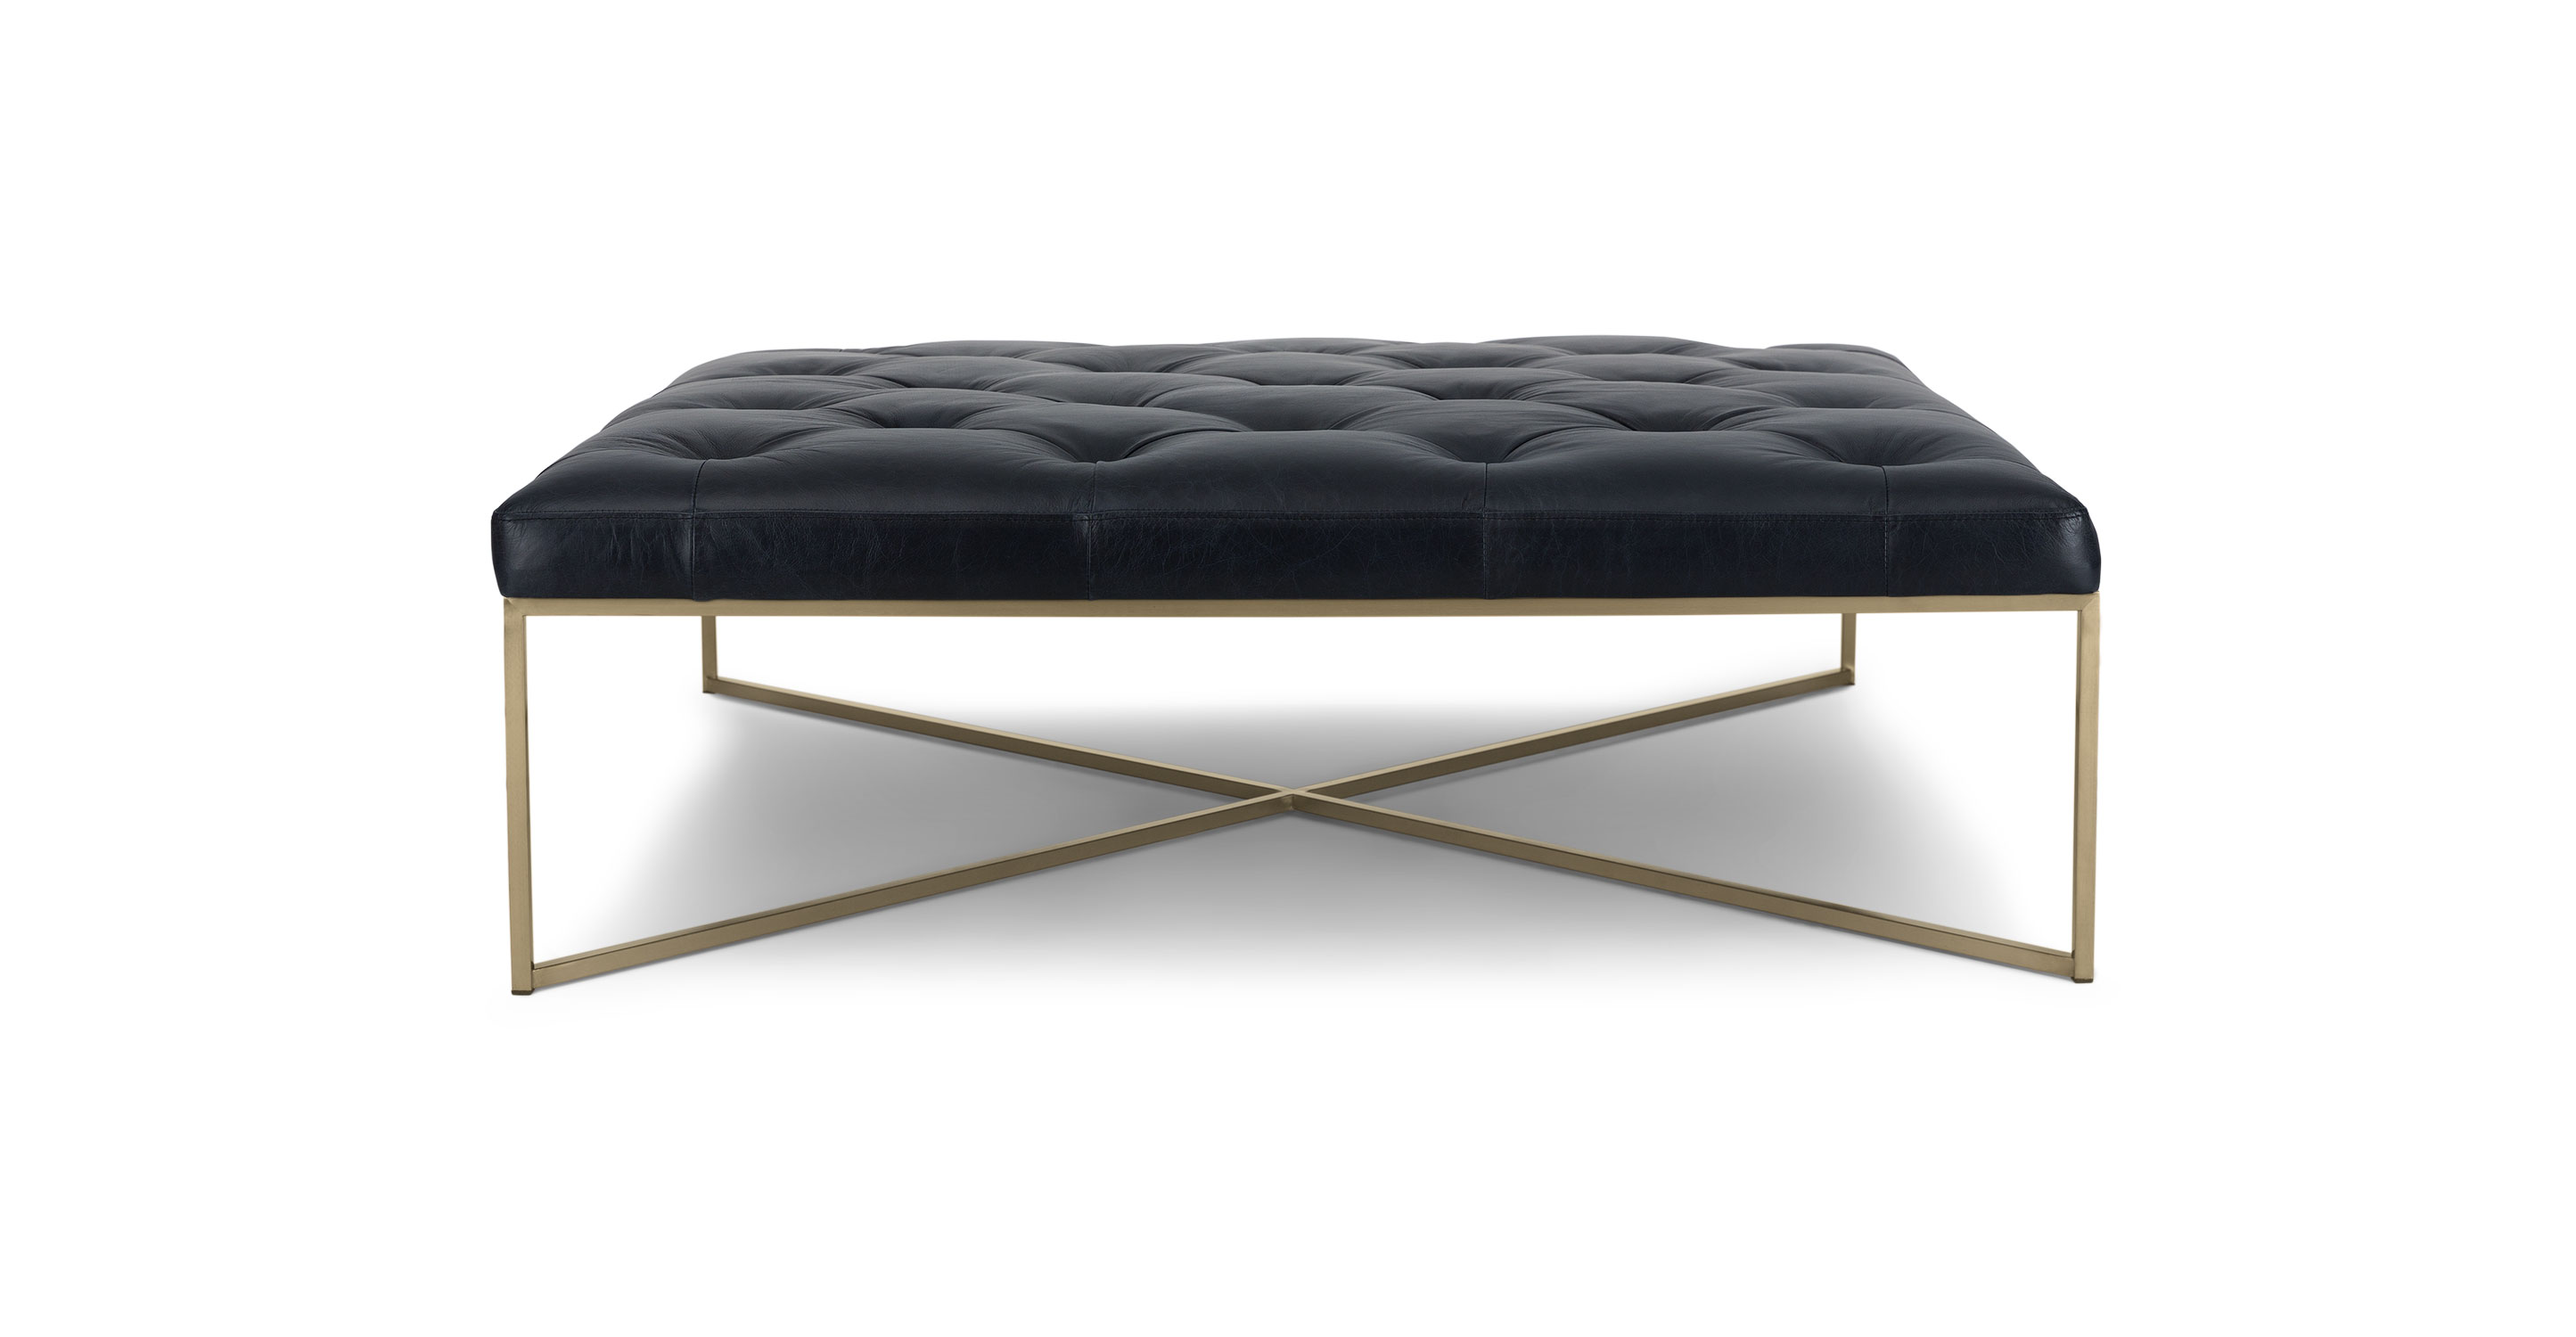 evening Sagging Shredded Square Brushed Brass & Charme Black Leather Ottoman | Article